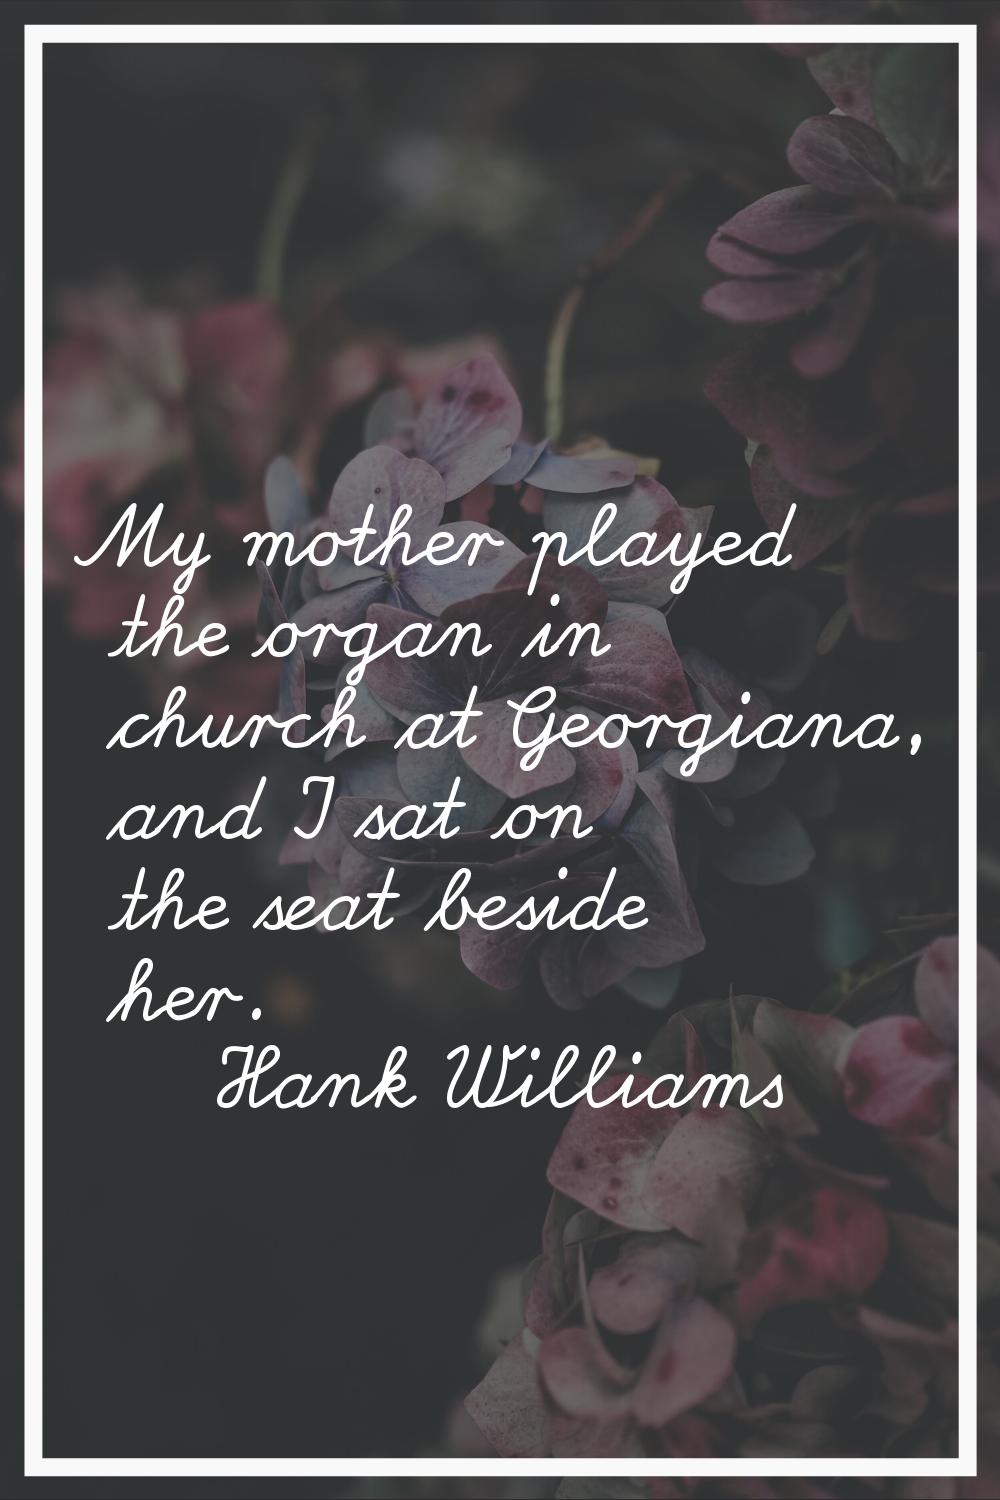 My mother played the organ in church at Georgiana, and I sat on the seat beside her.